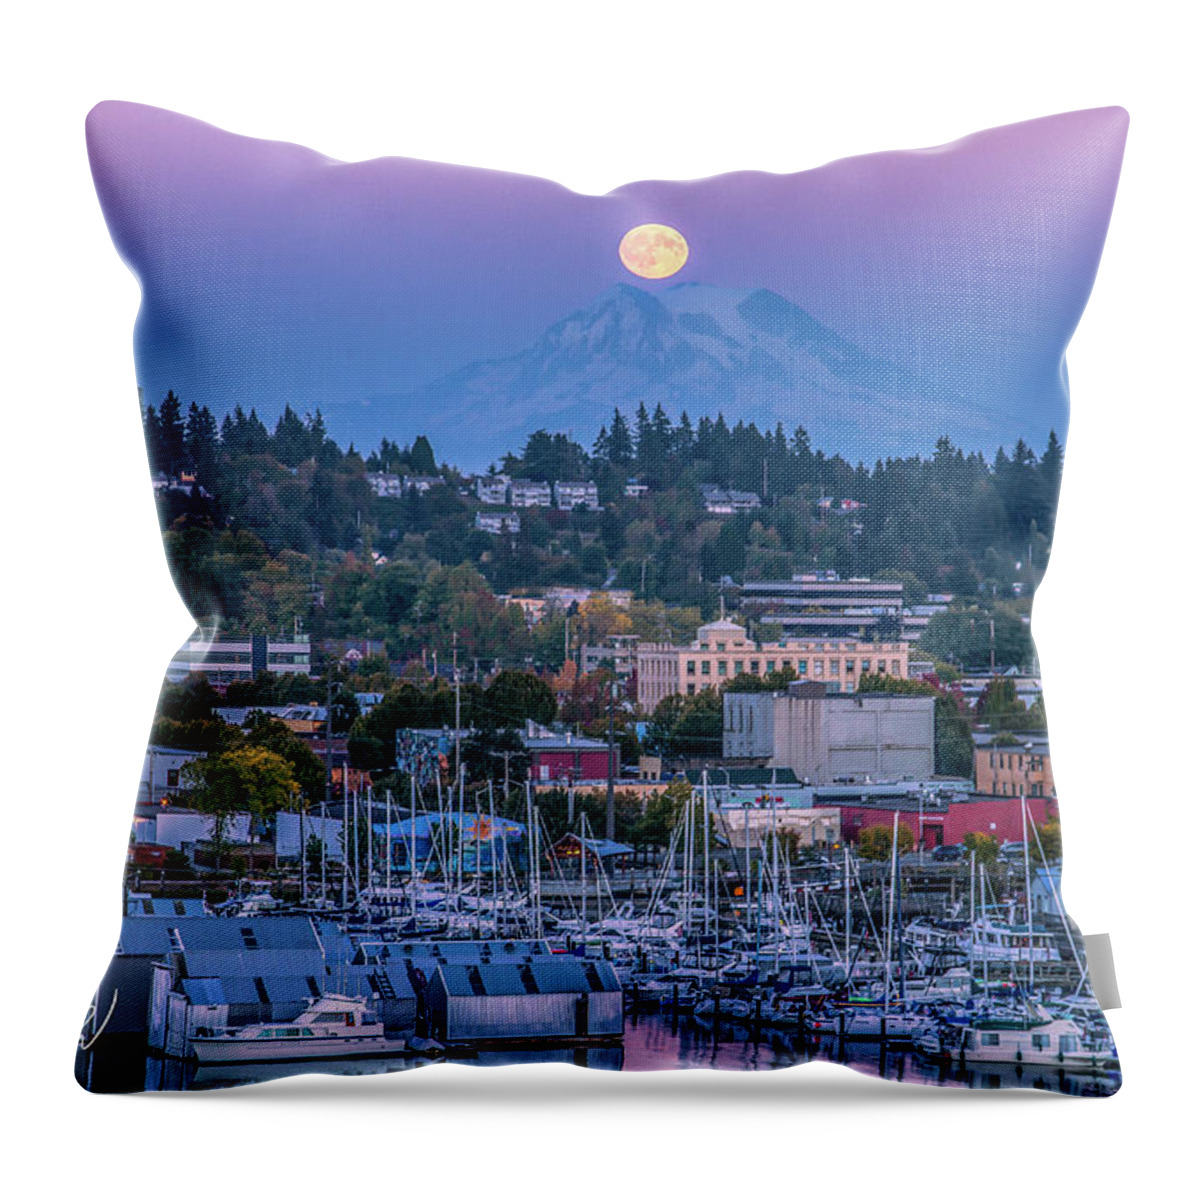 Full Moon Throw Pillow featuring the photograph Olympia Full Moon 2 by Mark Joseph